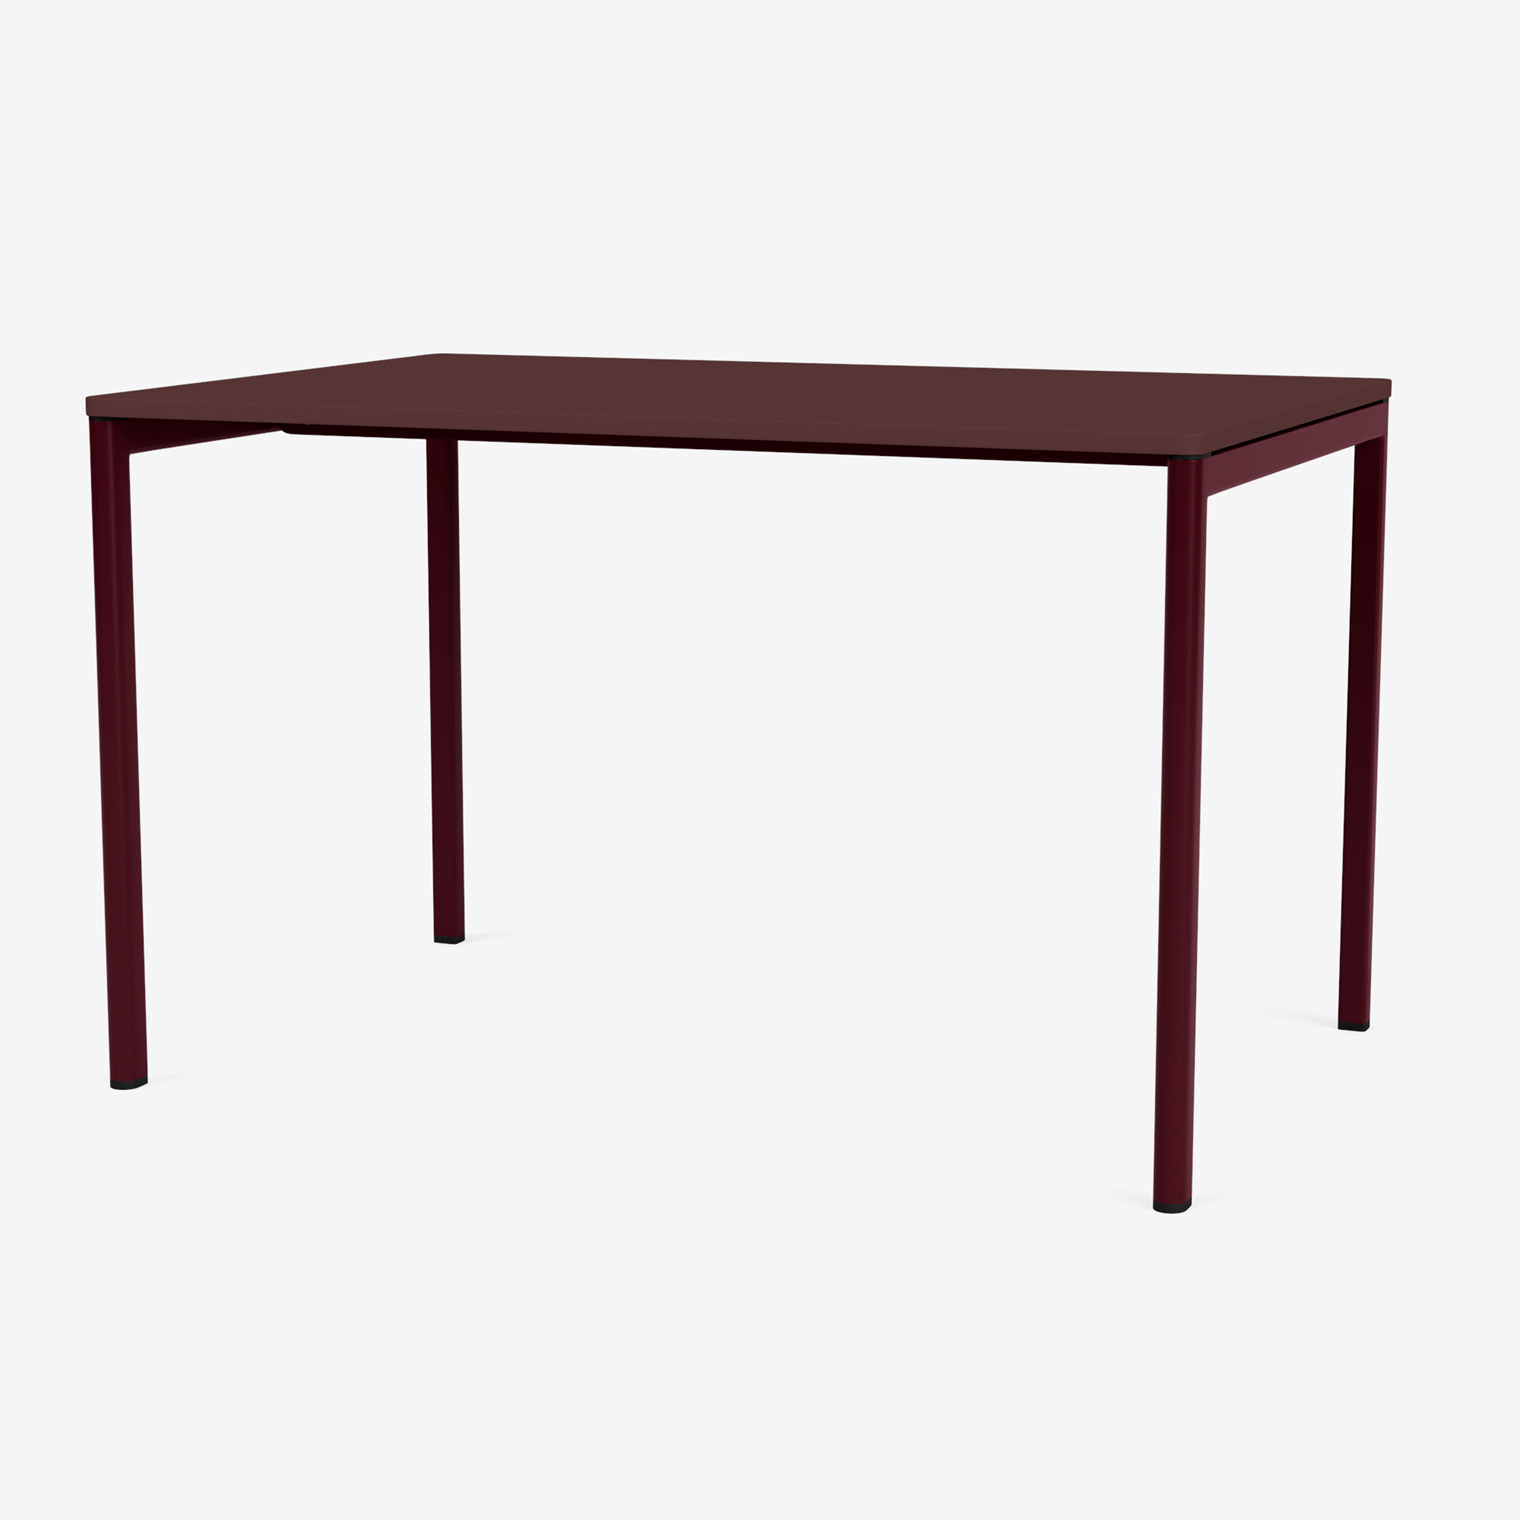 Moser Table Foldable